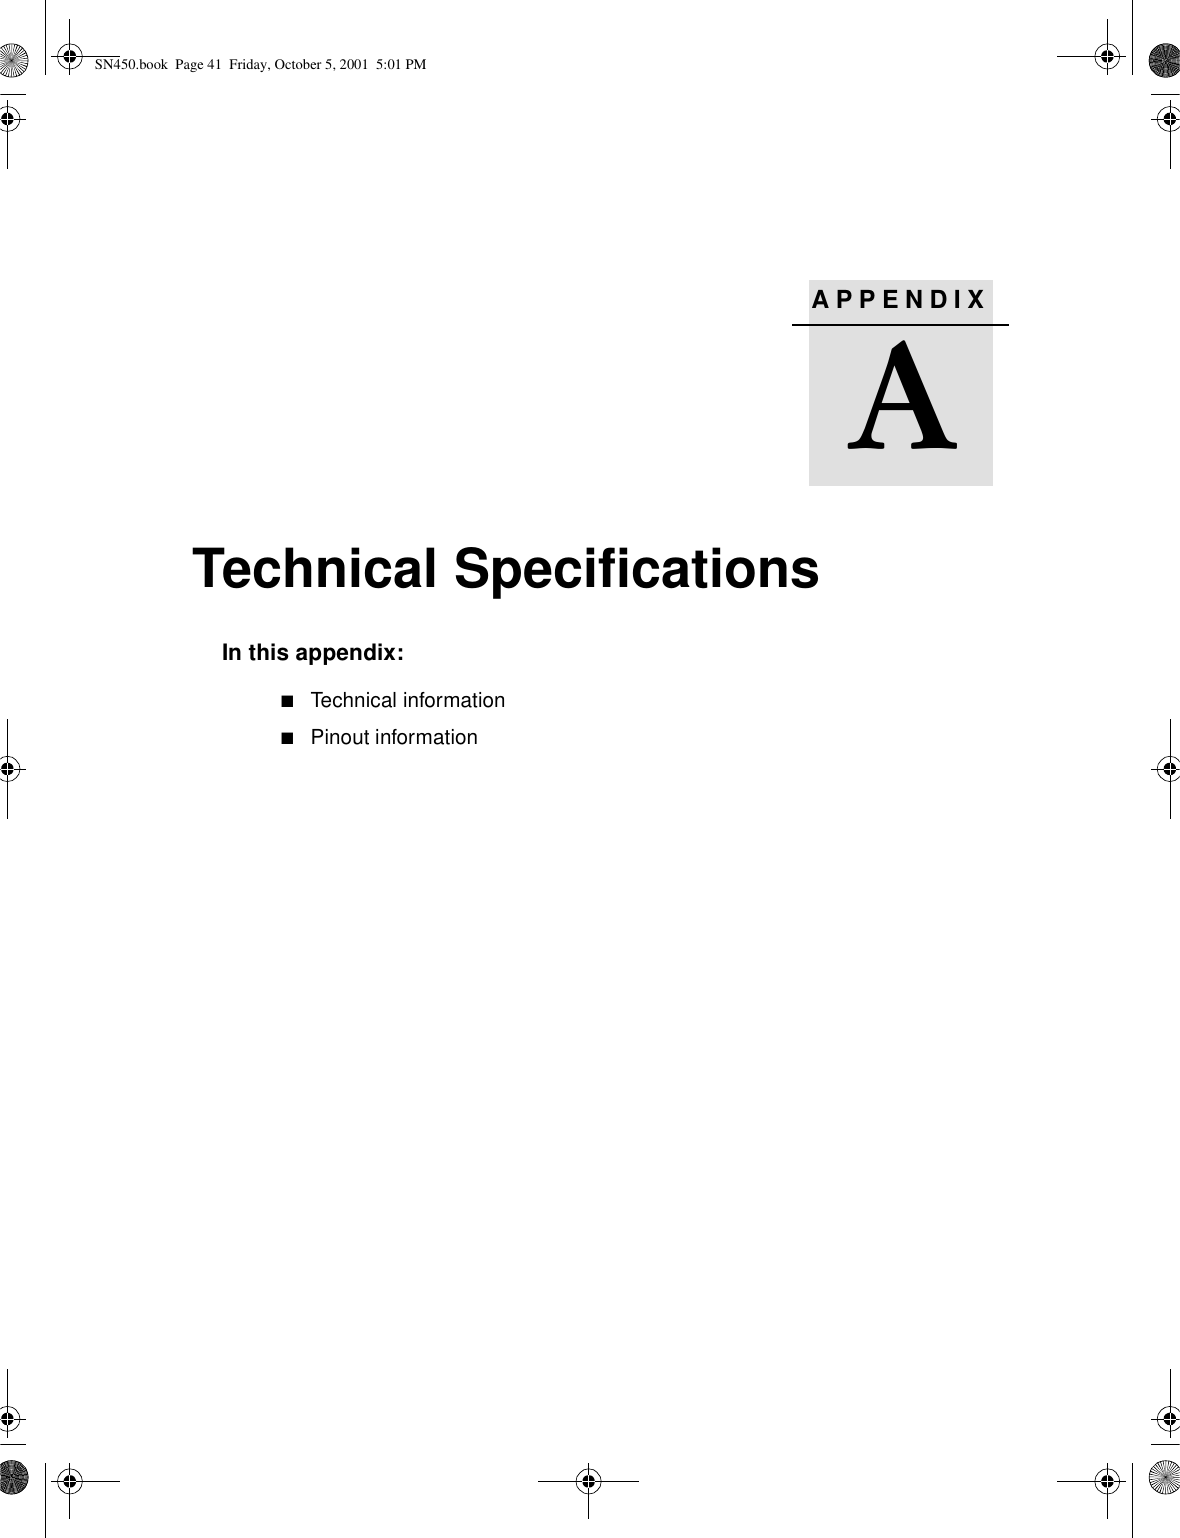 APPENDIXATechnical SpecificationsAIn this appendix:■Technical information■Pinout informationSN450.book  Page 41  Friday, October 5, 2001  5:01 PM